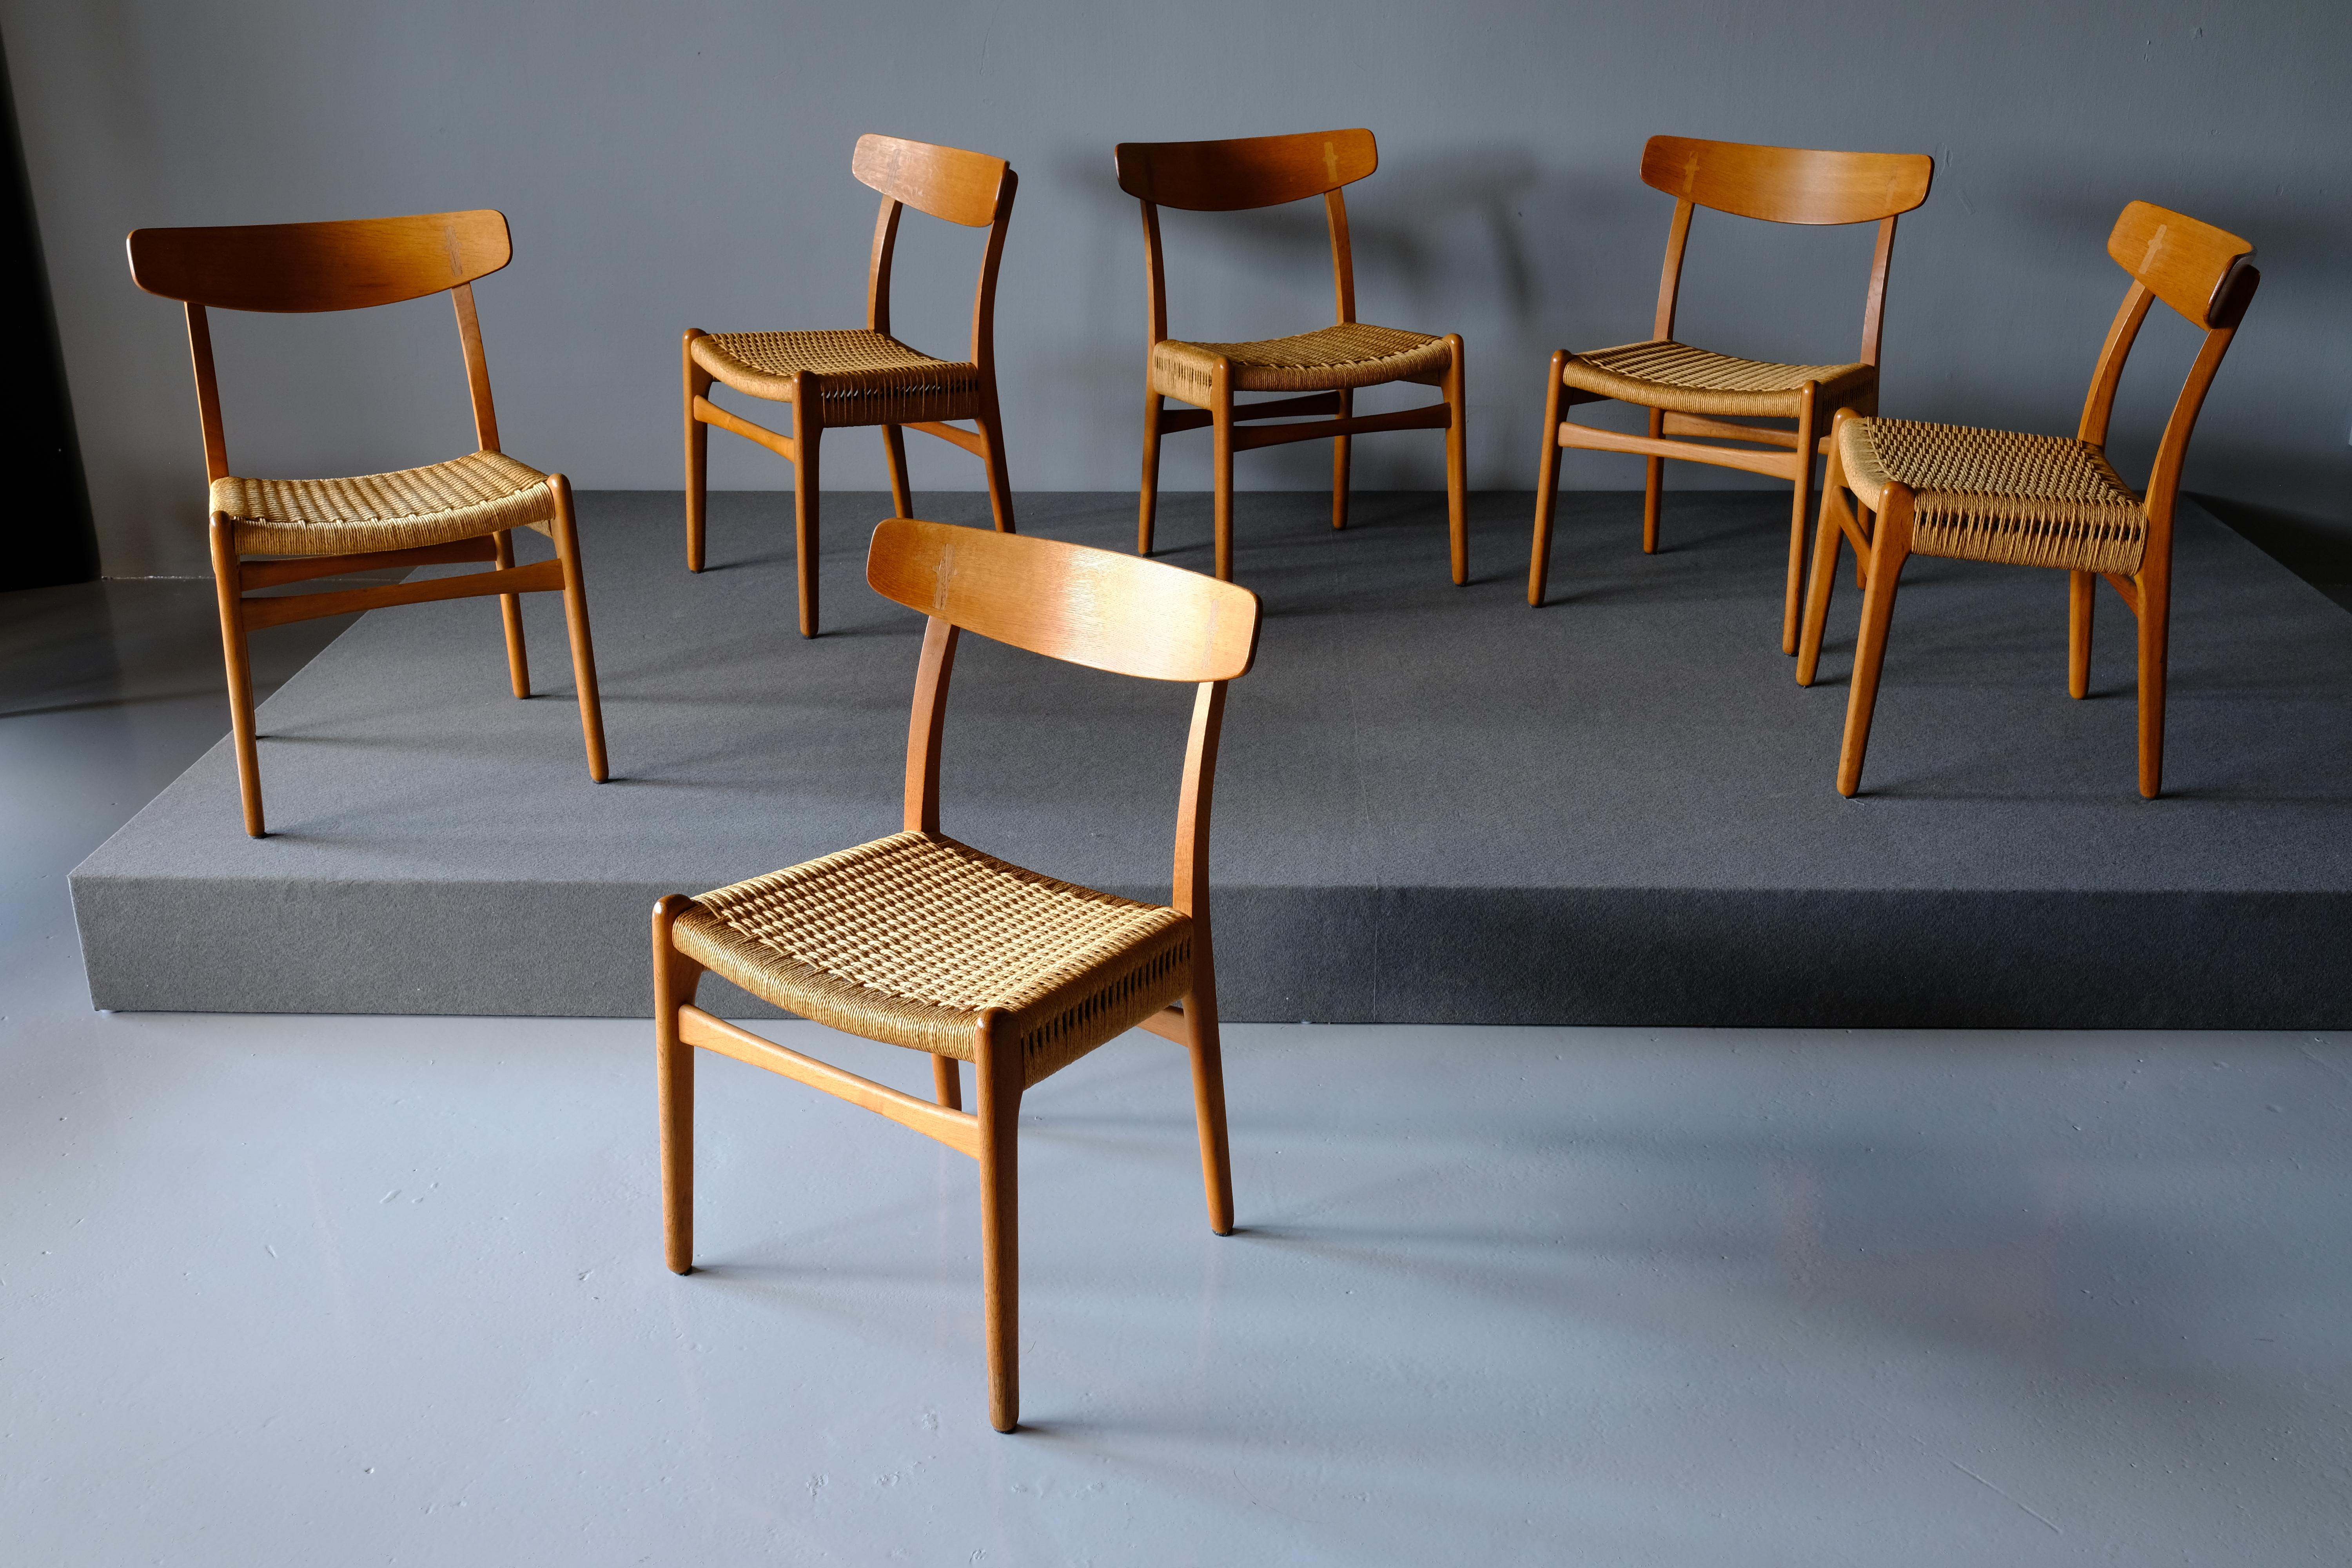 Set of 6 dining chairs, CH 23 by Hans Wegner for Carl Hansen & Son . The CH 23 is an early example of Wegner’s signature style and impeccable craftsmanship. It was one of the 5 pieces of furniture designed exclusively for Carl Hansen & Son in 1950.